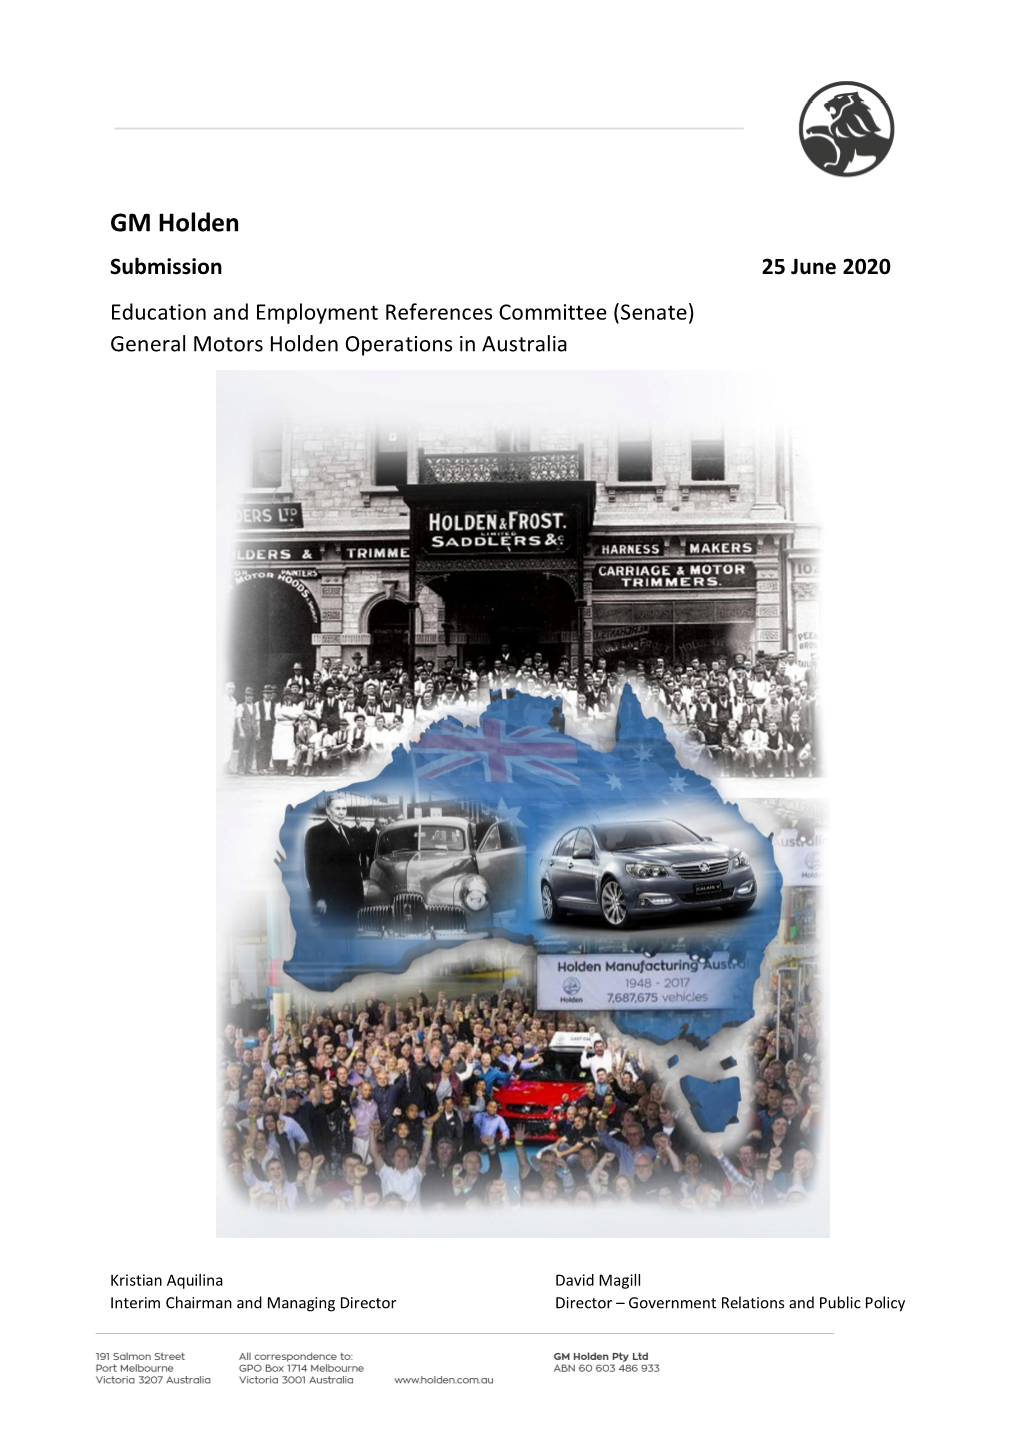 GM Holden Submission 25 June 2020 Education and Employment References Committee (Senate) General Motors Holden Operations in Australia